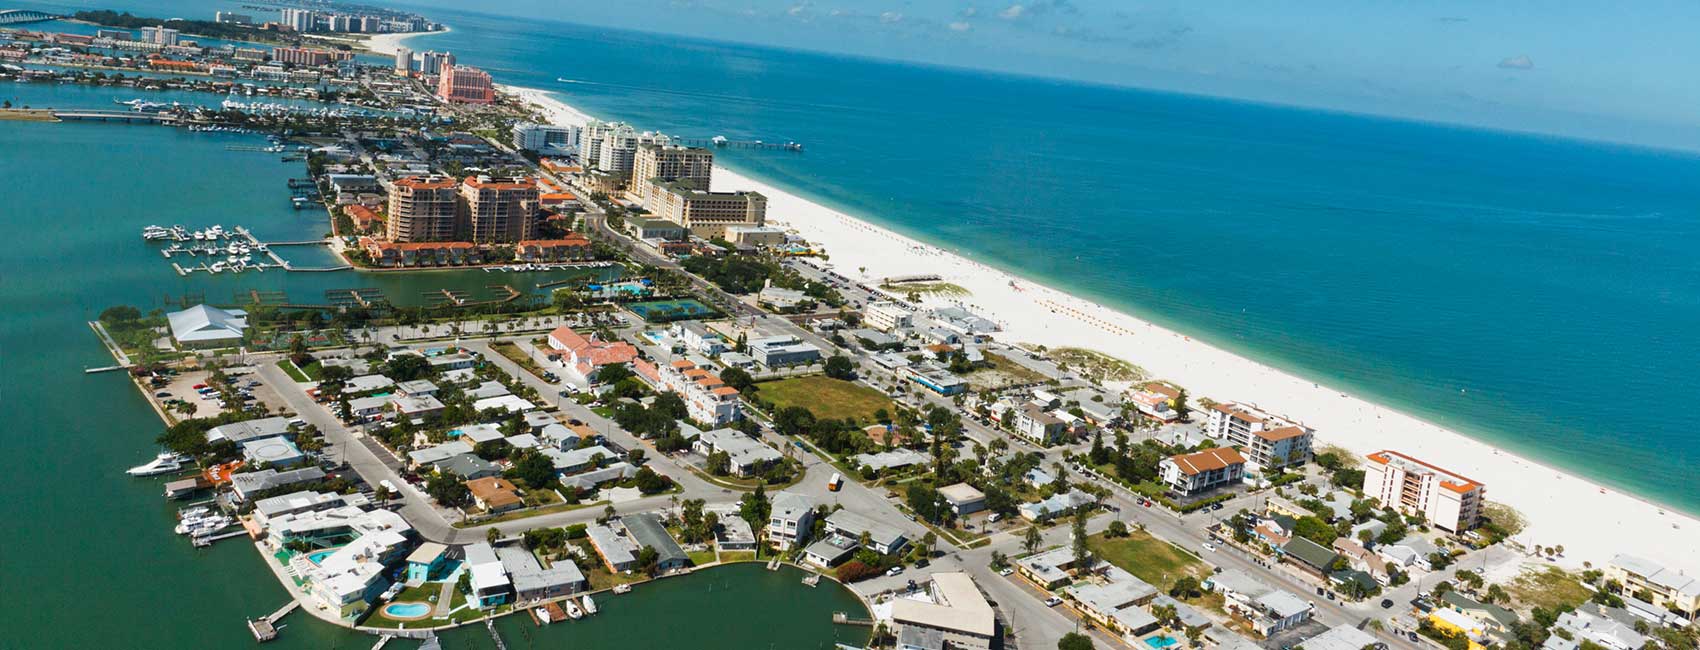 Things To Do in Clearwater and St. Pete Florida